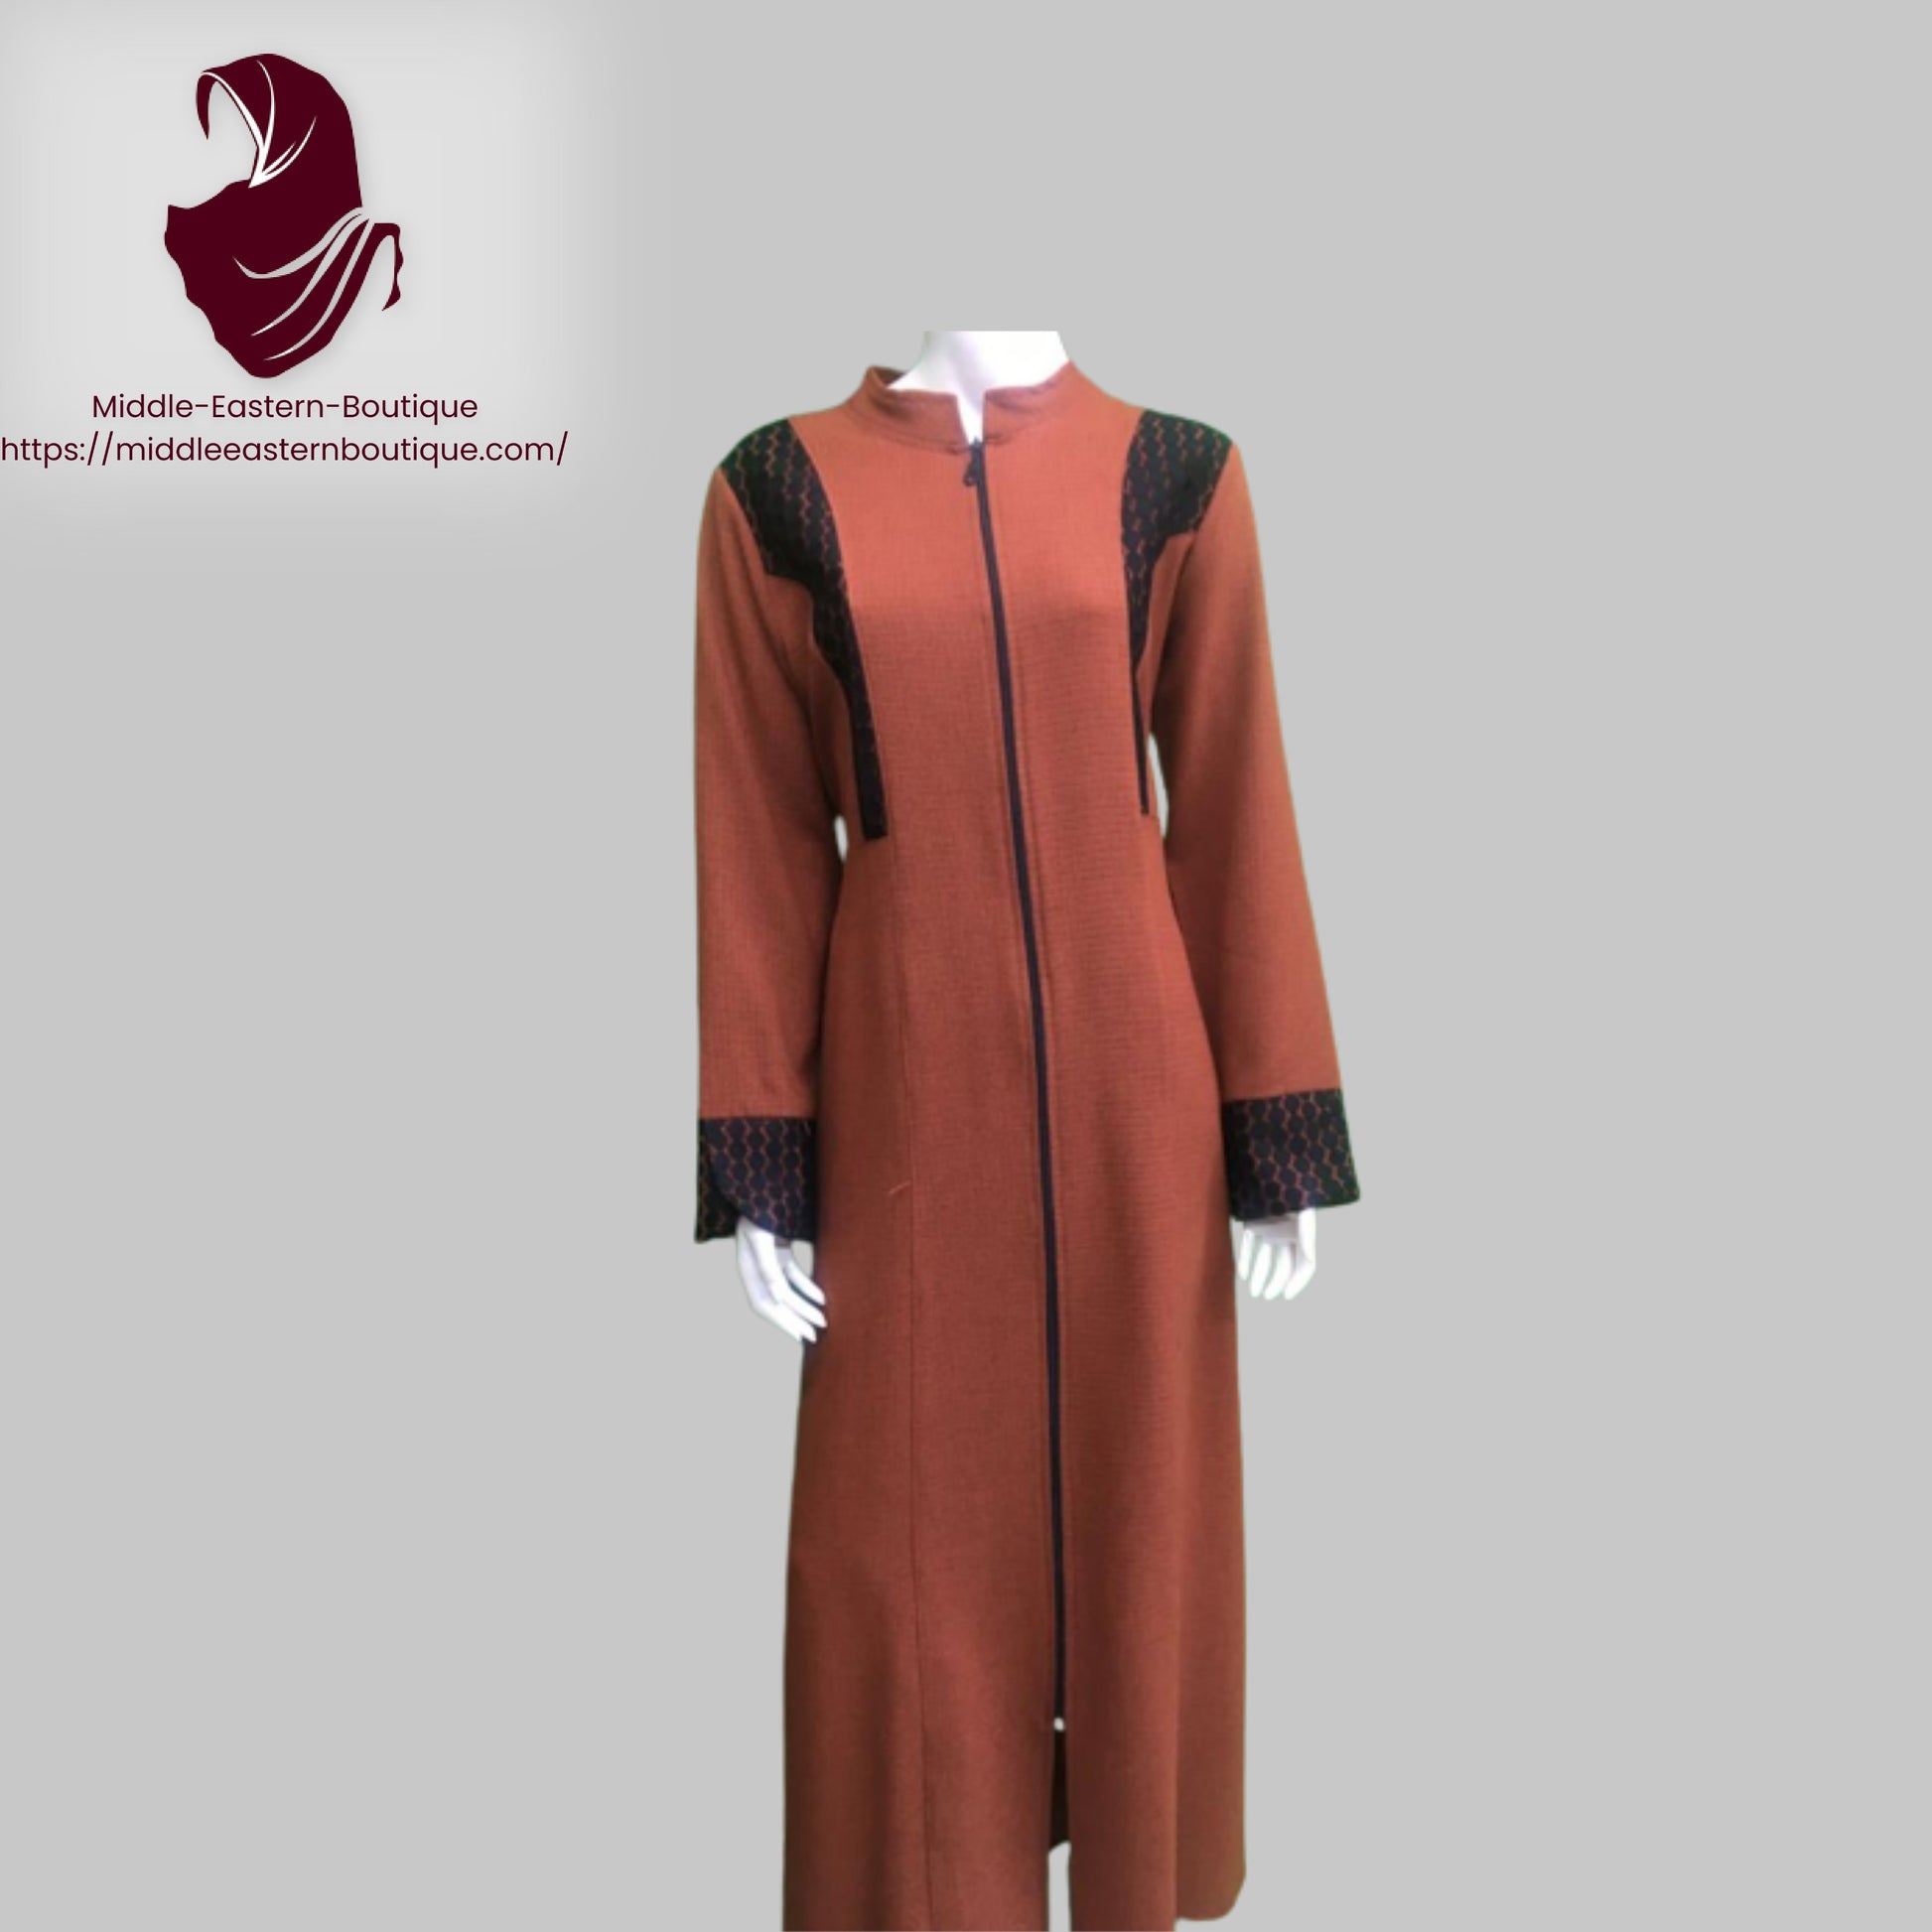 Abaya - Coming Soon  - New Collection of Abaya 2022 Middle Eastern Boutique